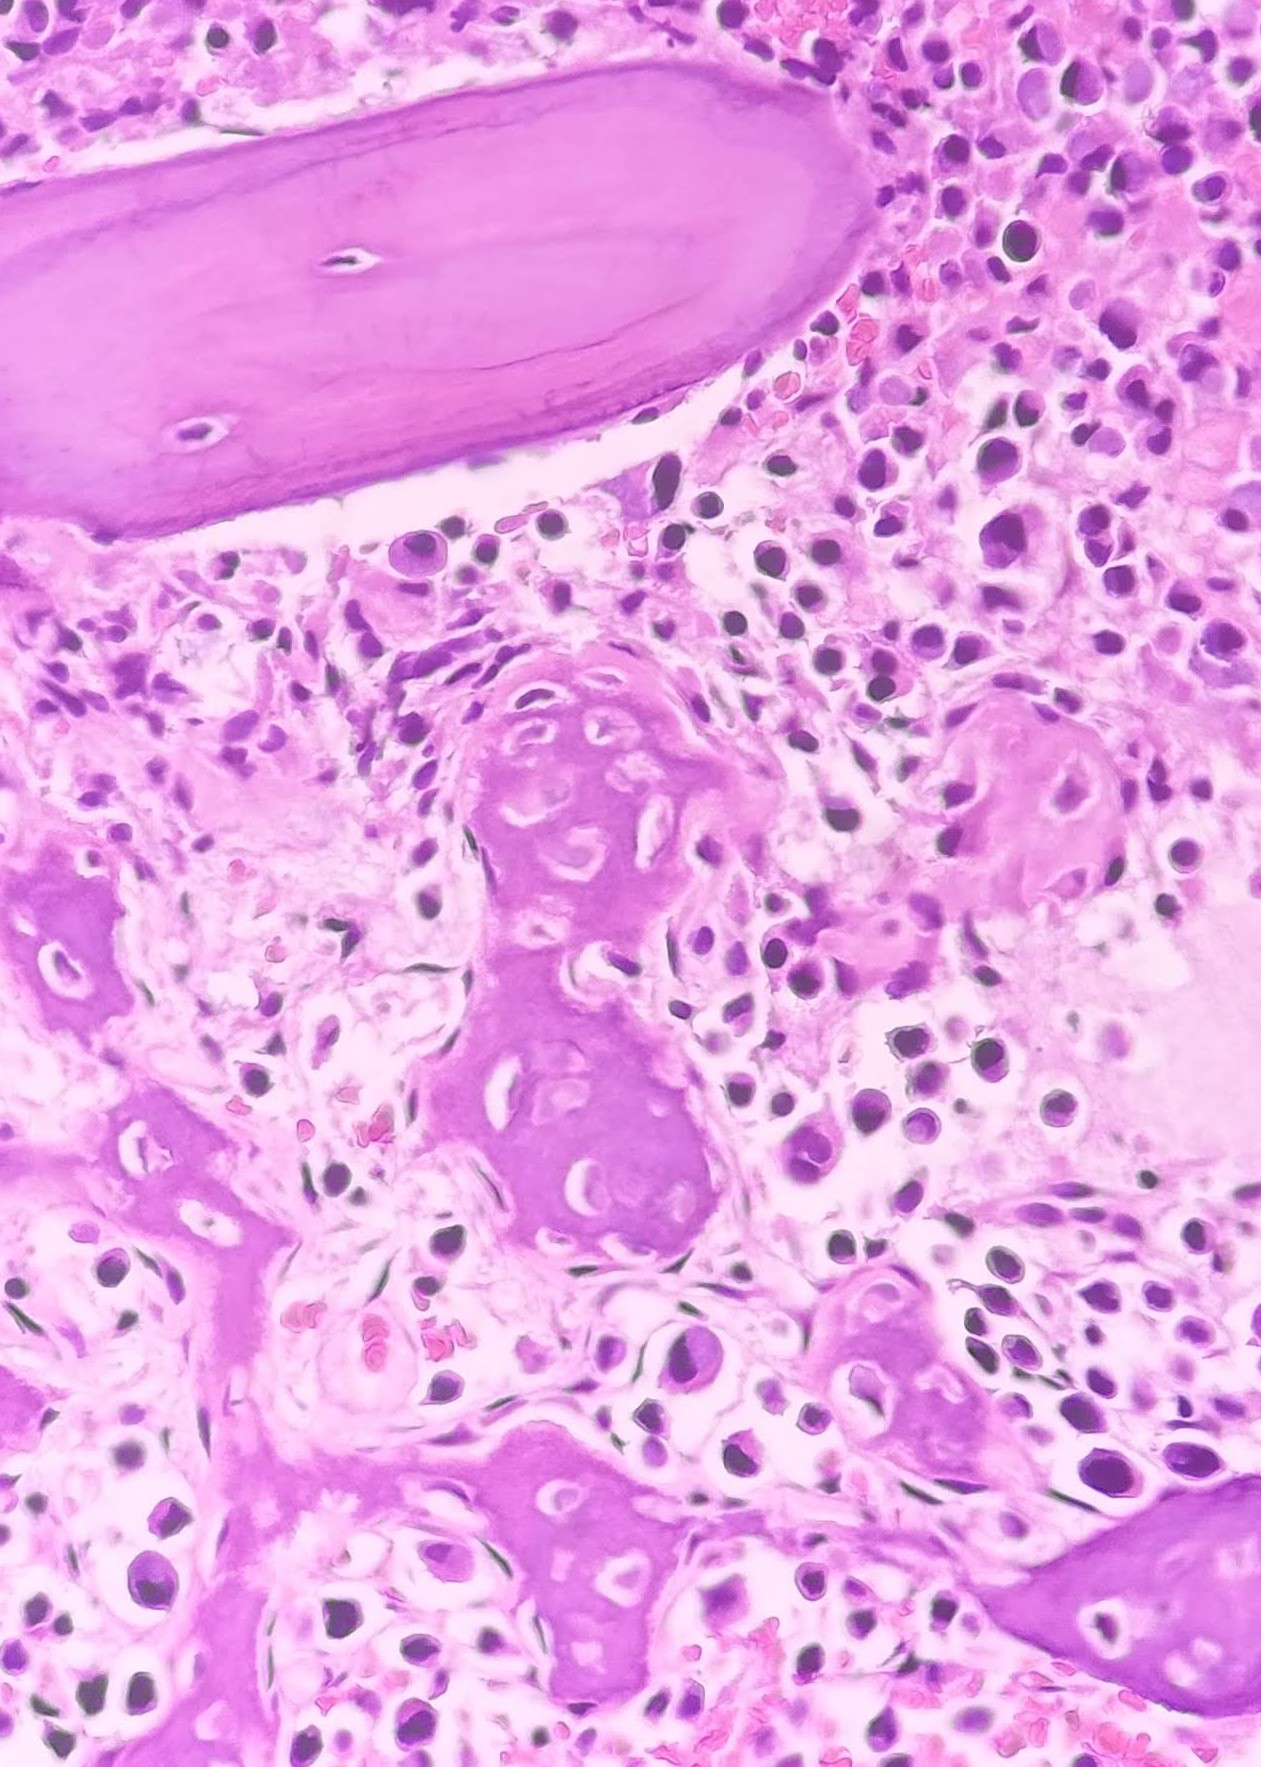 <p>Metastatic Carcinoma. Bone marrow biopsy showing infiltration by epithelial cells with signet ring morphology.</p>